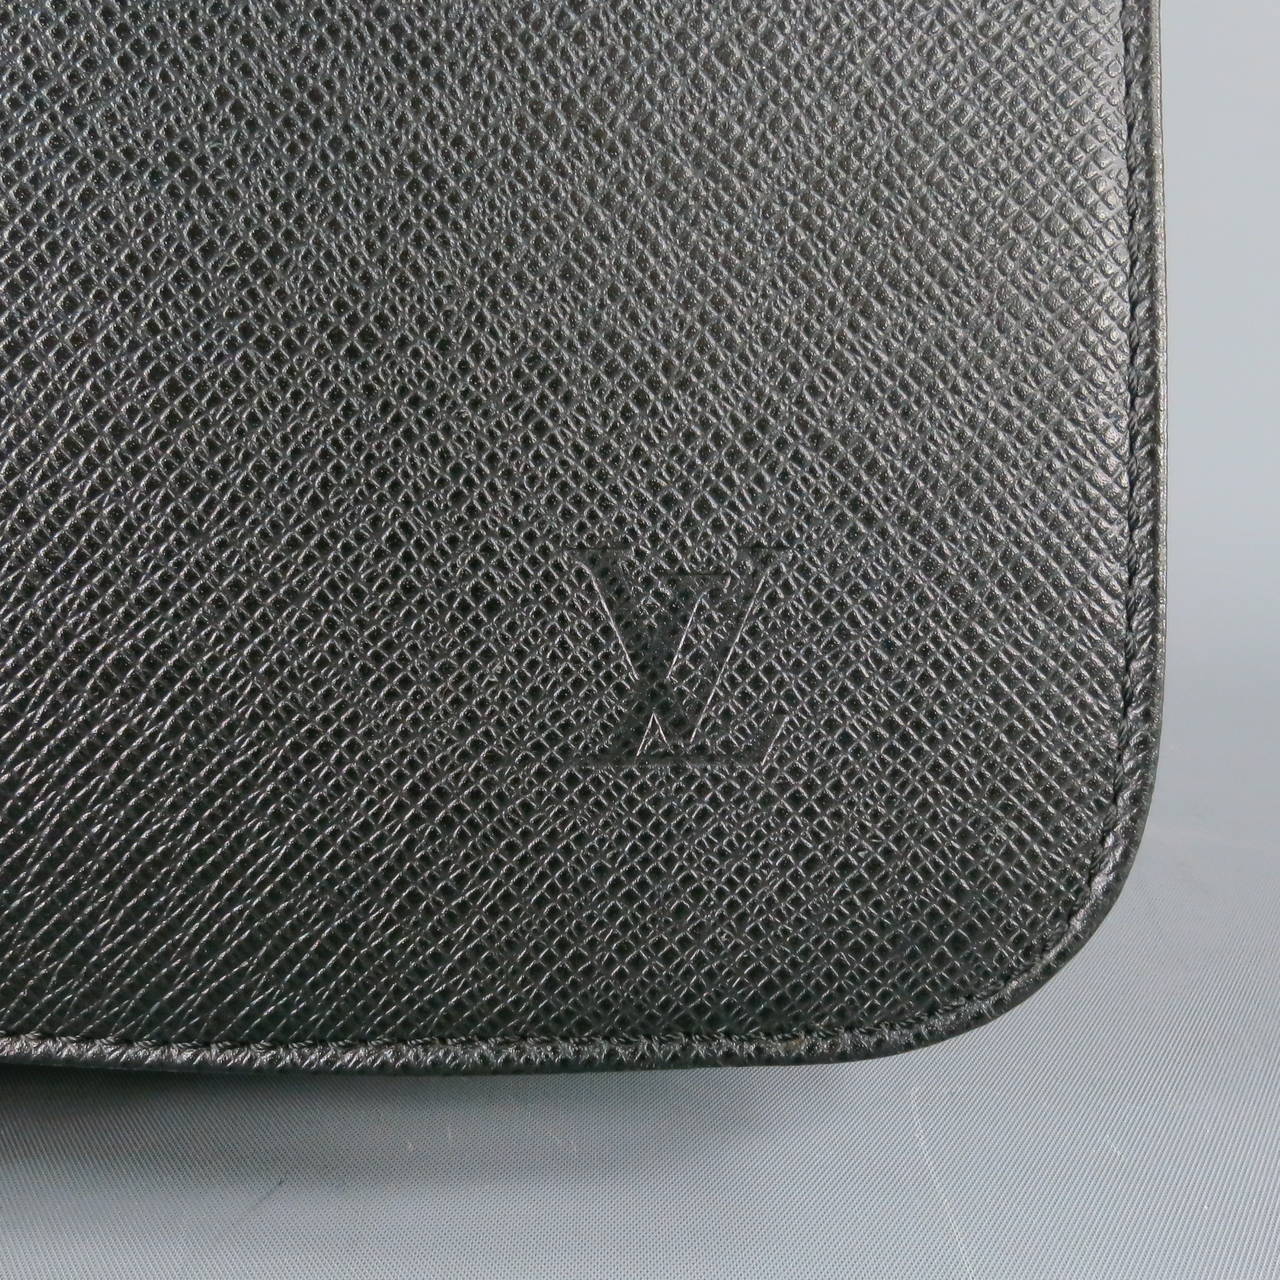 Classic messenger bag by LOUIS VUITTON. The VIKTOR comes in a black taiga textured leather with cloth back and features a flap closure embossed with 